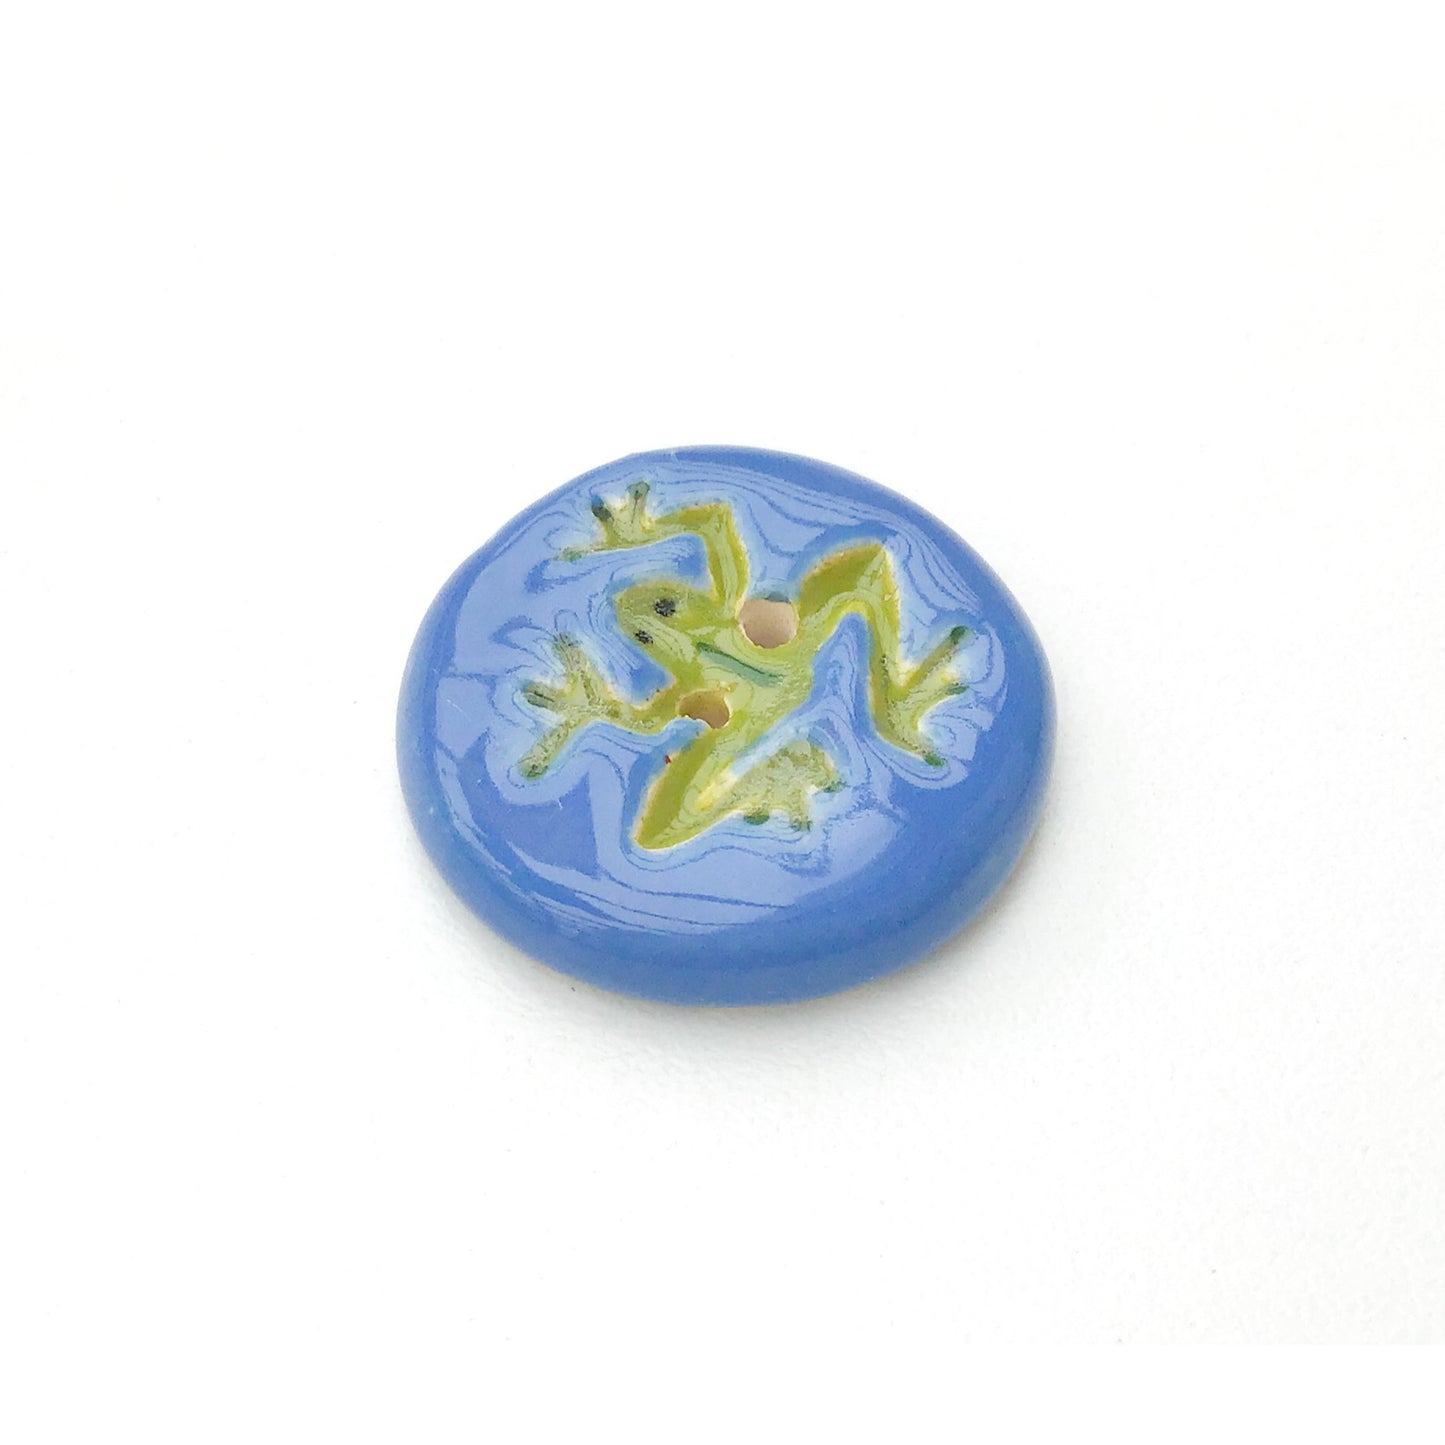 Leaping Frogs Button Collection: A Collection of Ceramic Buttons with Fun Frogs